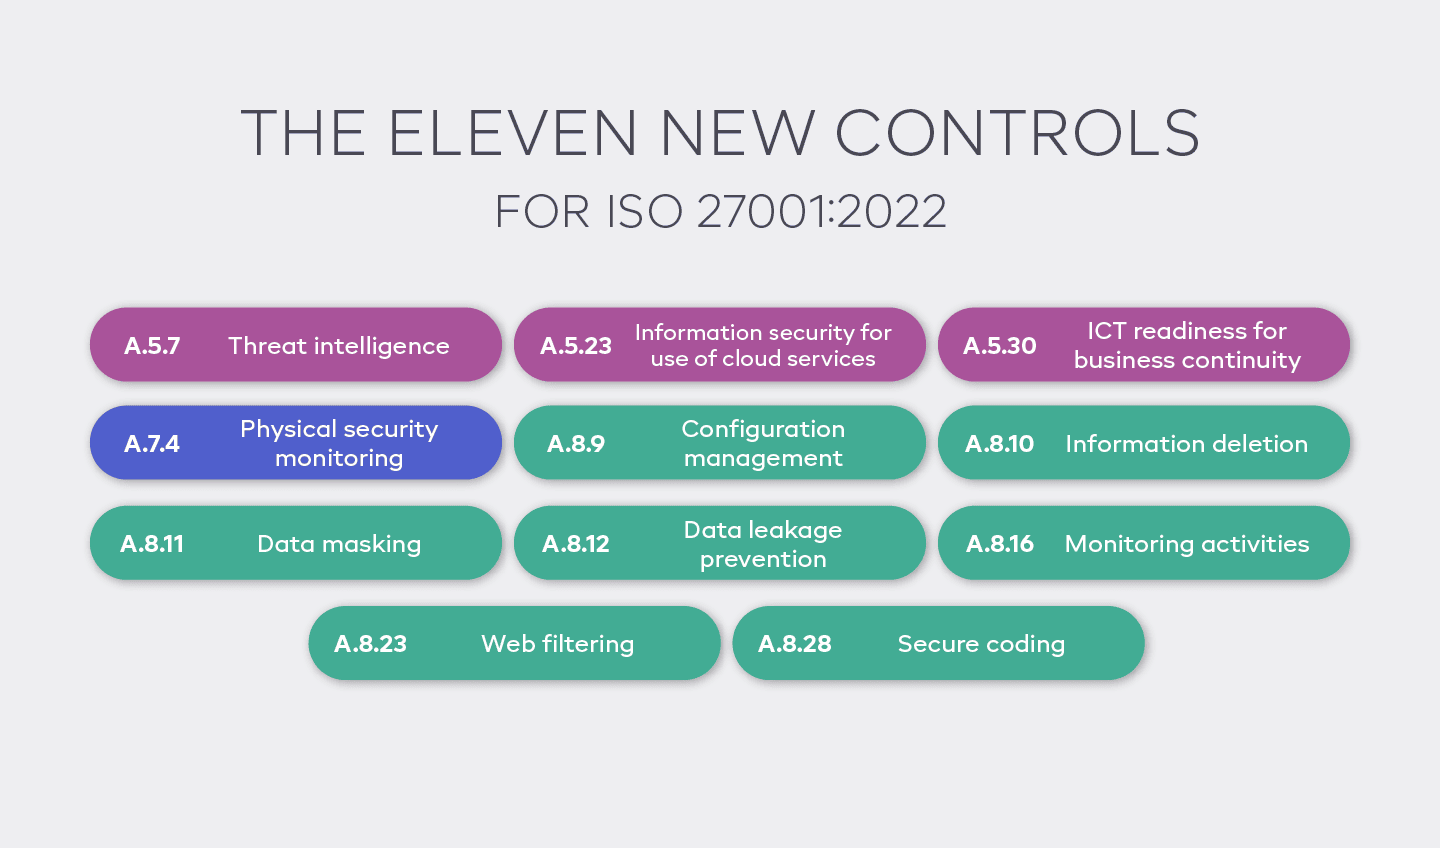 The eleven new controls for ISO 27001:2022